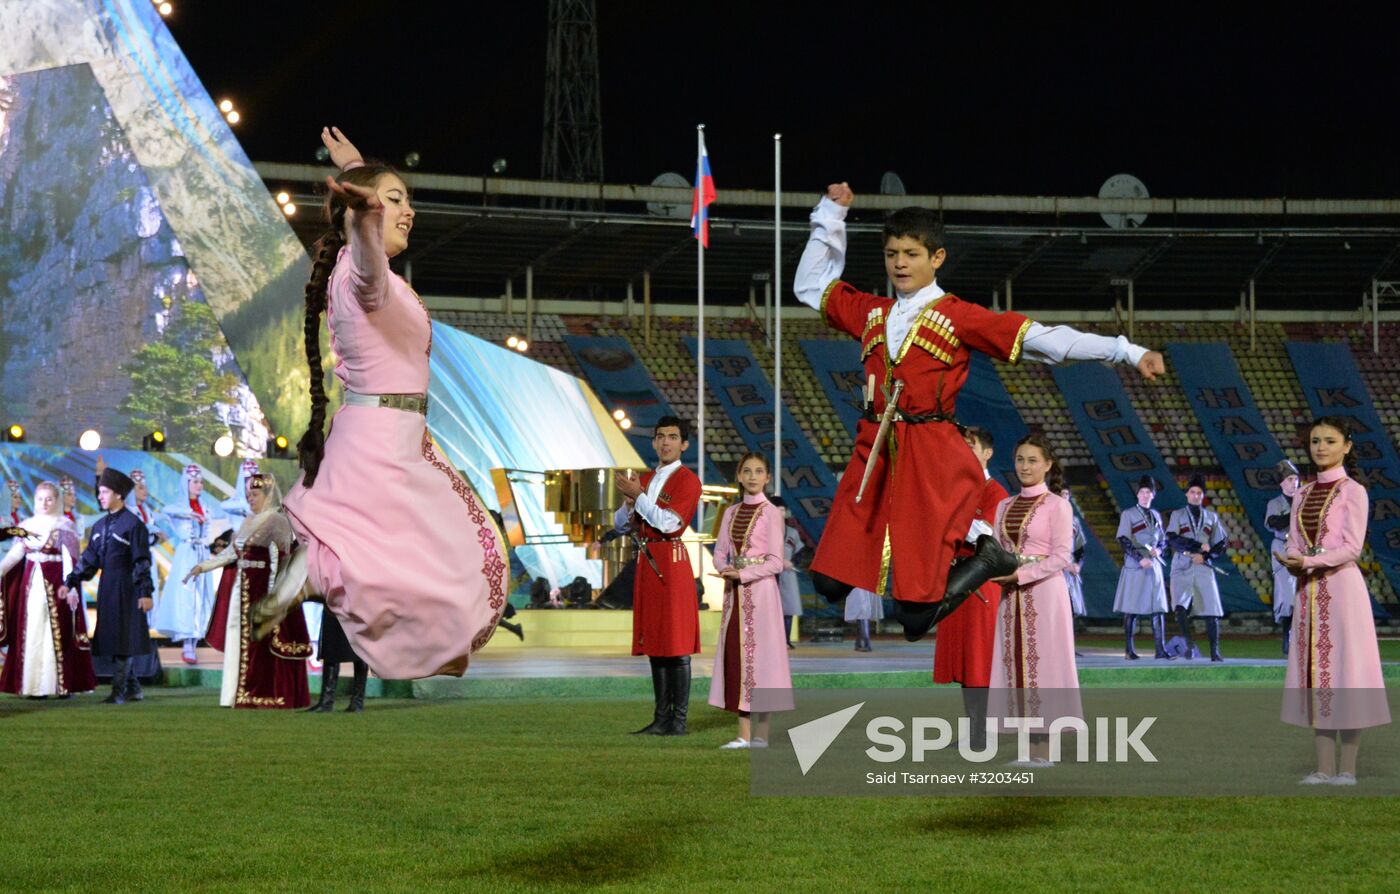 Eigth Festival of Culture and Sports of Caucasian Peoples kicks off